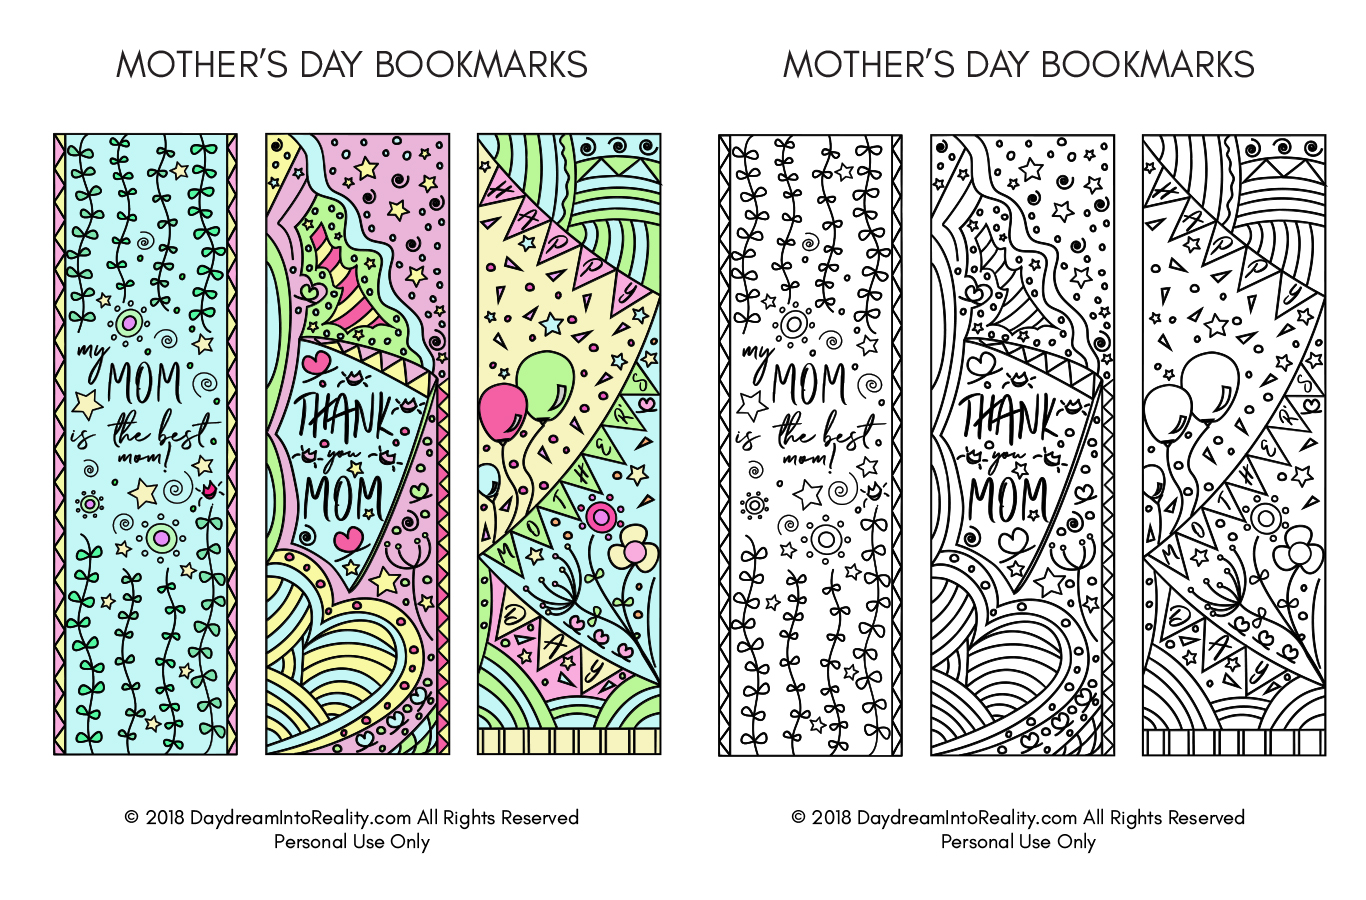 Coloring Mother's Day Bookmarks Free Printable Daydream Into Reality